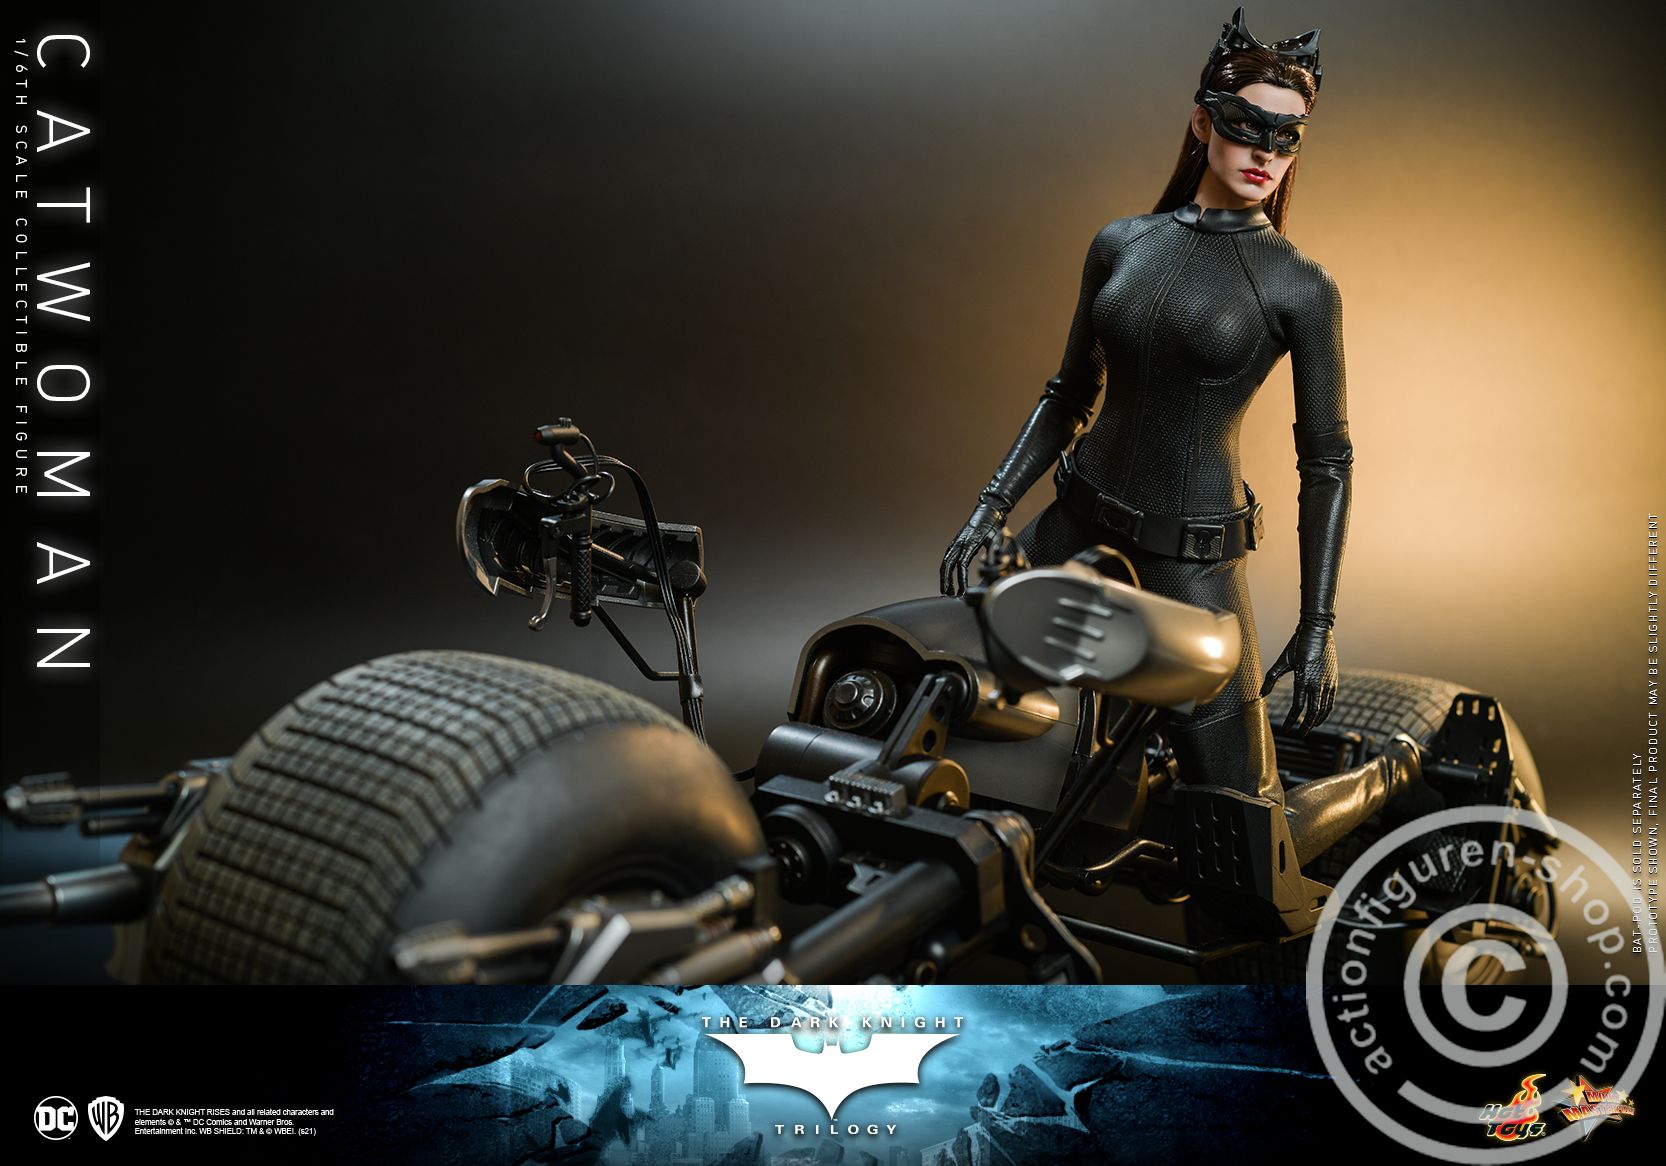 The Dark Knight Trilogy - Catwoman